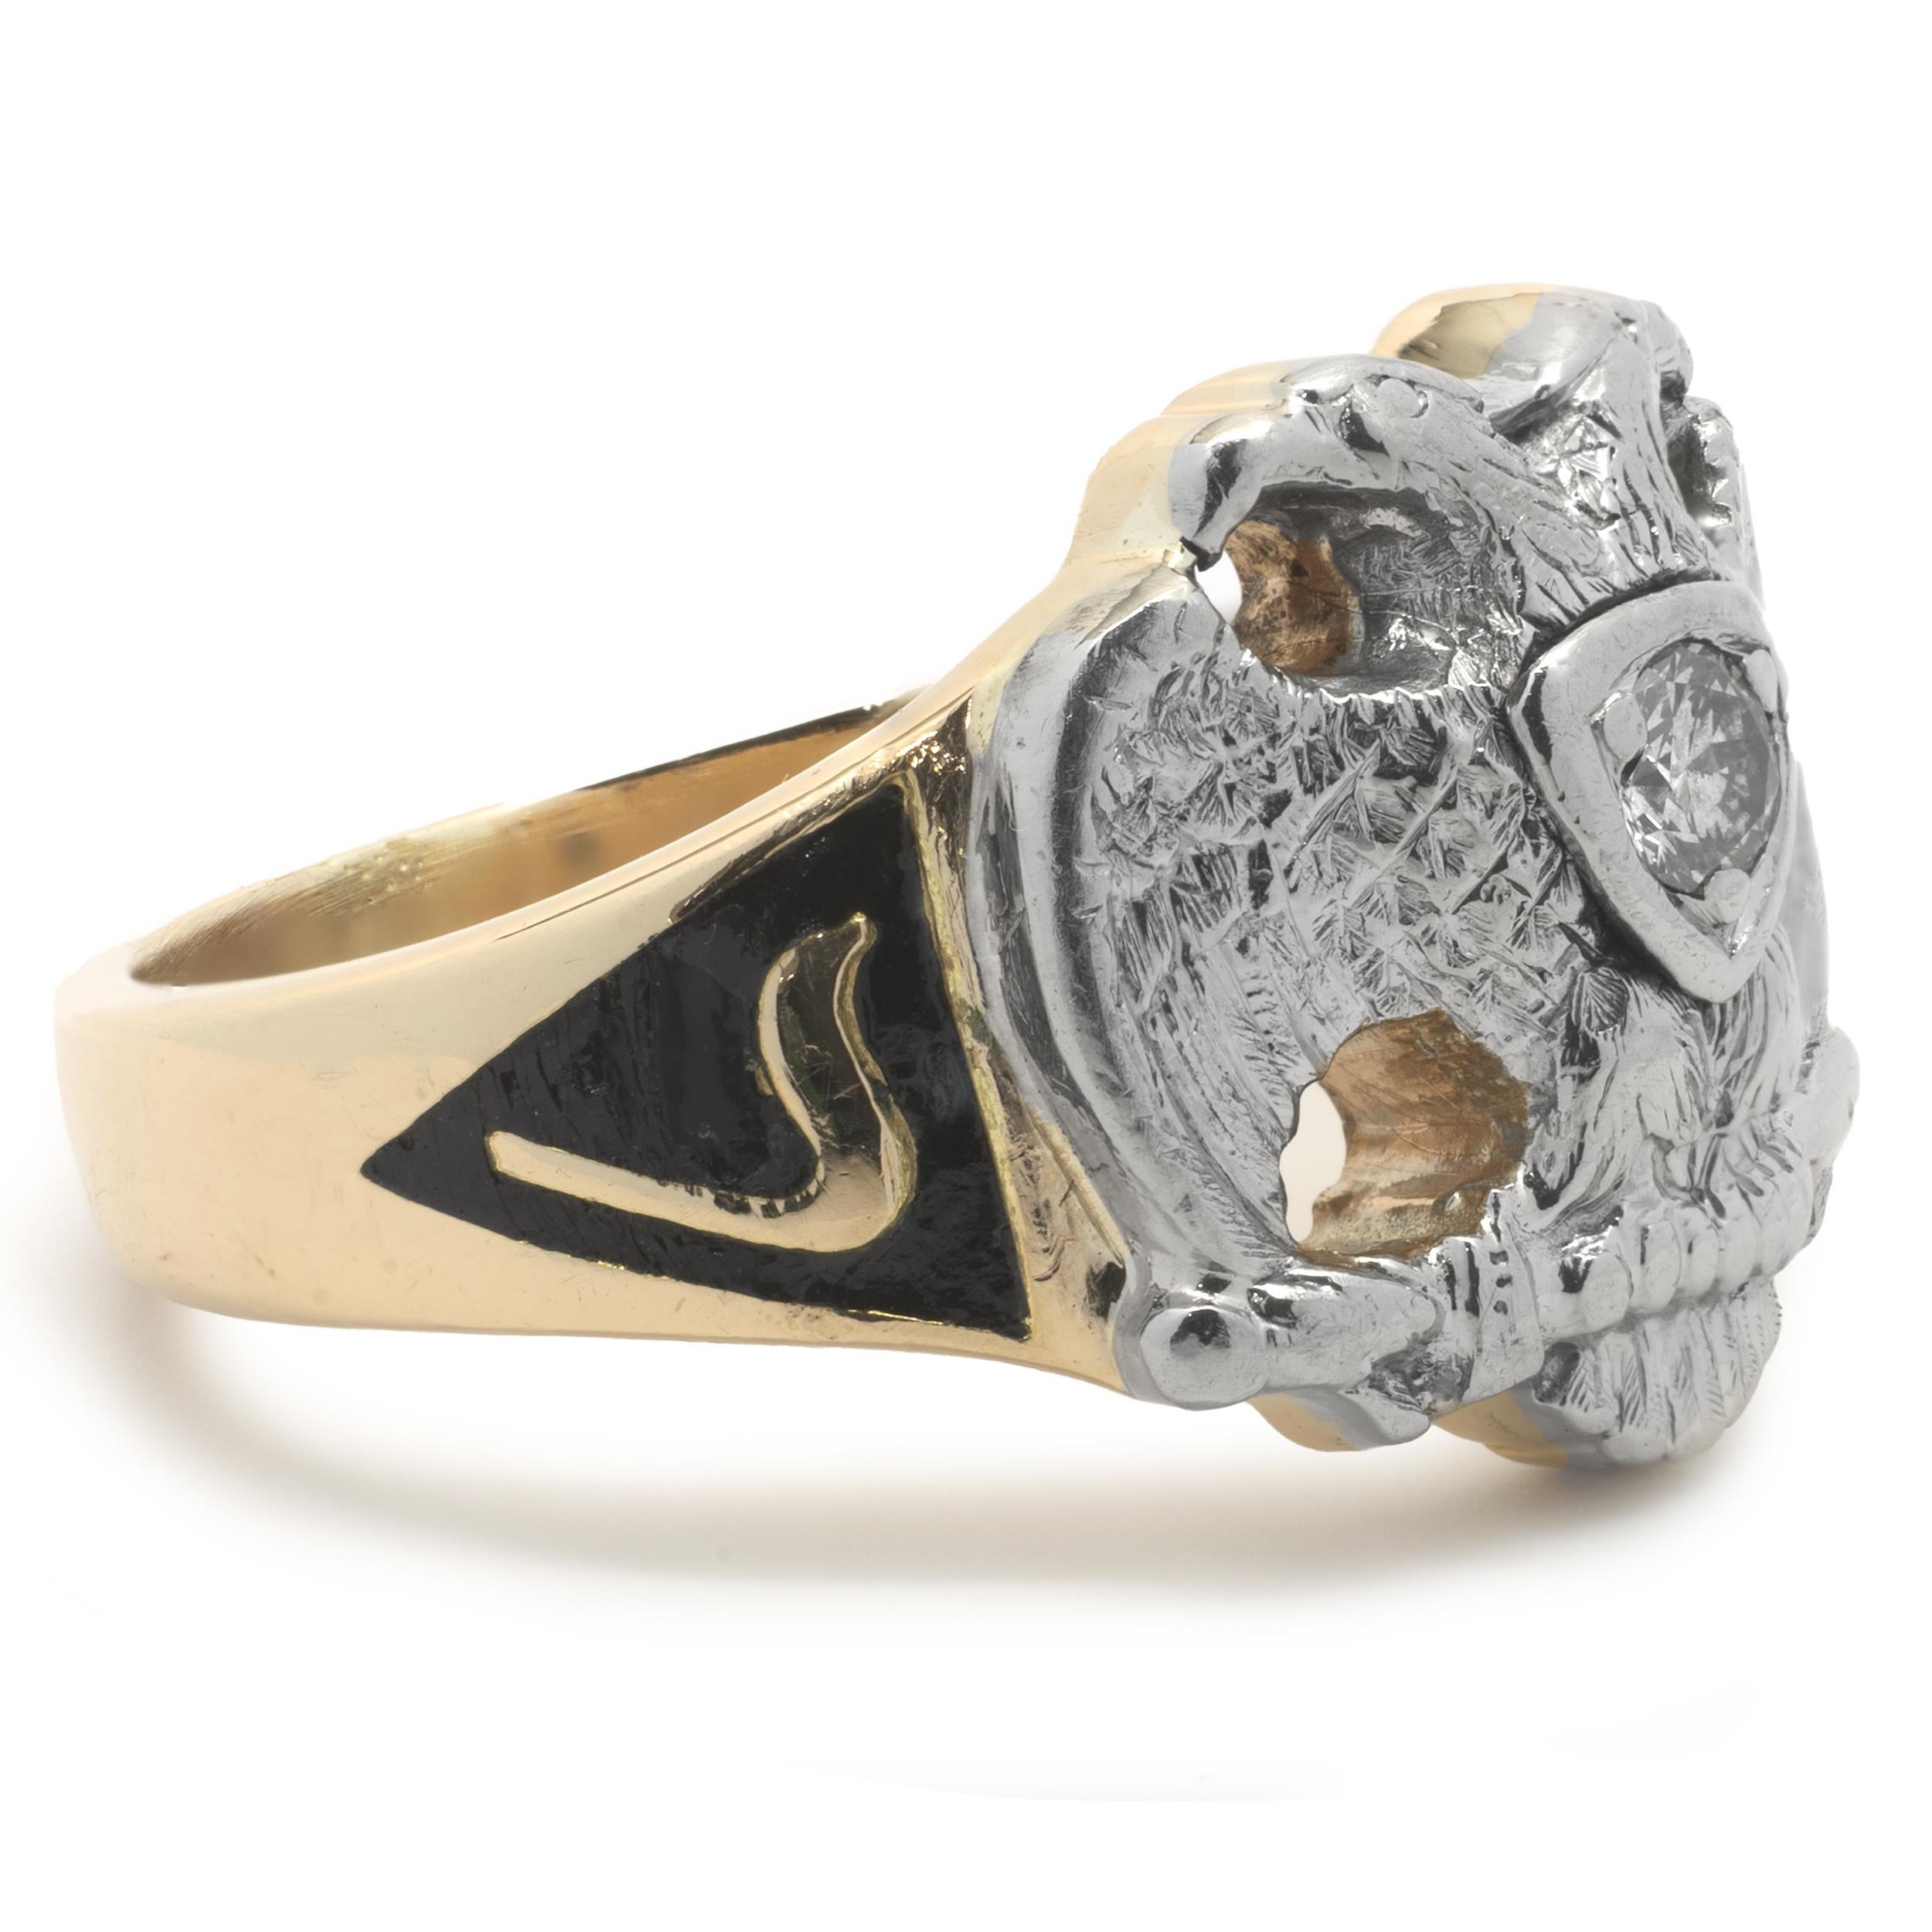 Designer: custom
Material: 14K yellow and white gold
Diamond: 1 round cut = .16cttw
Color: H
Clarity: SI2
Ring size: 8.25 (please allow two additional shipping days for sizing requests)
Weight:  10.99 grams
